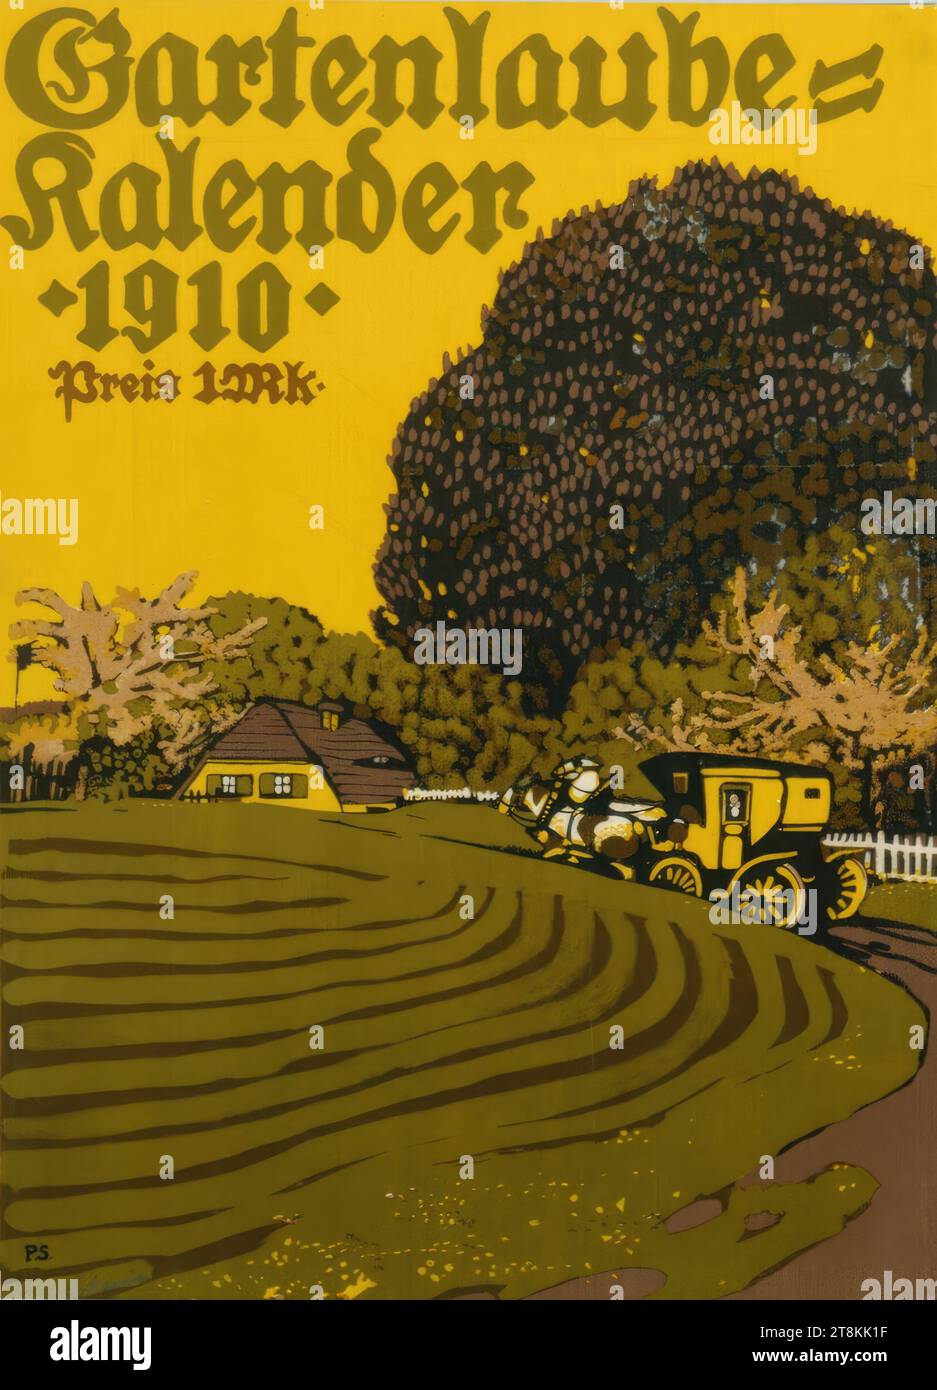 Garden arbor calendar 1910, Heinrich Jäger, Germany, 1884 - 1915, Paul Scheurich, New York 1883 - 1945 Brandenburg an der Havel, 1909, print, color lithograph, sheet: 445 mm x 330 mm, verso: M.o. 'We ask you to use the first and fourth pages of this circular as posters in the shop window and in the shop!', in print Stock Photo